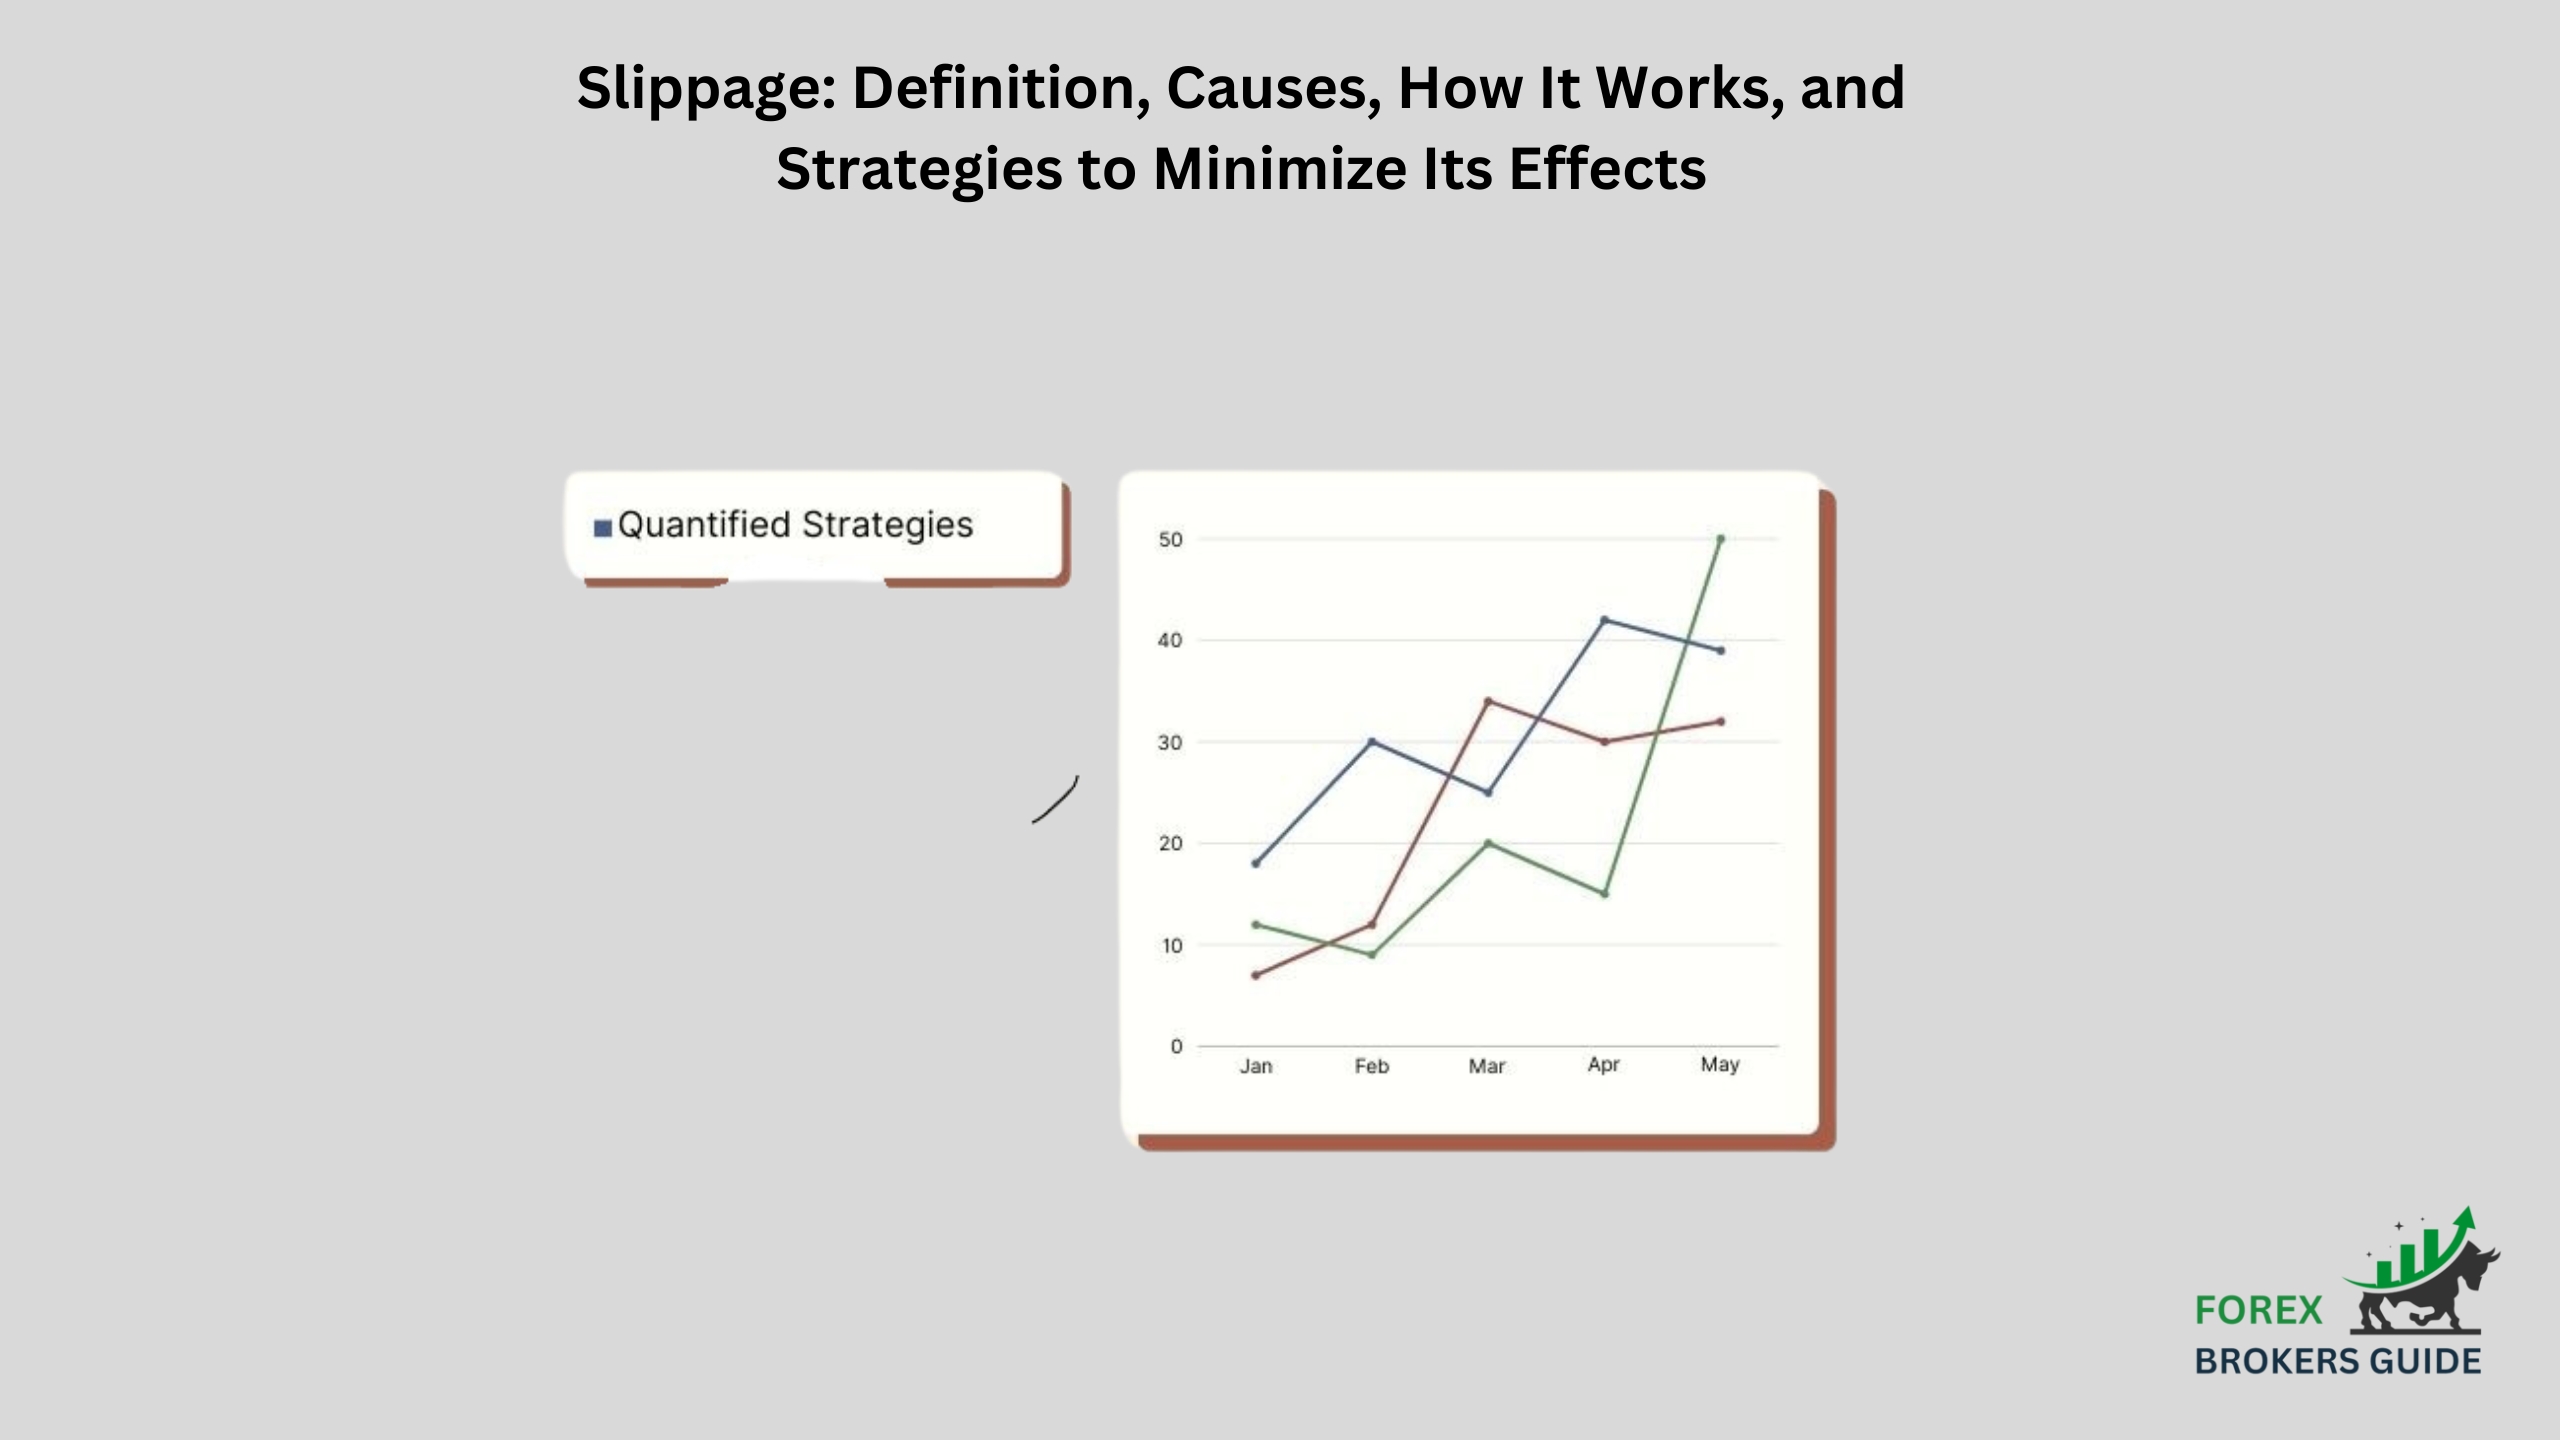 Slippage Definition, Causes, How It Works, and Strategies to Minimize Its Effects